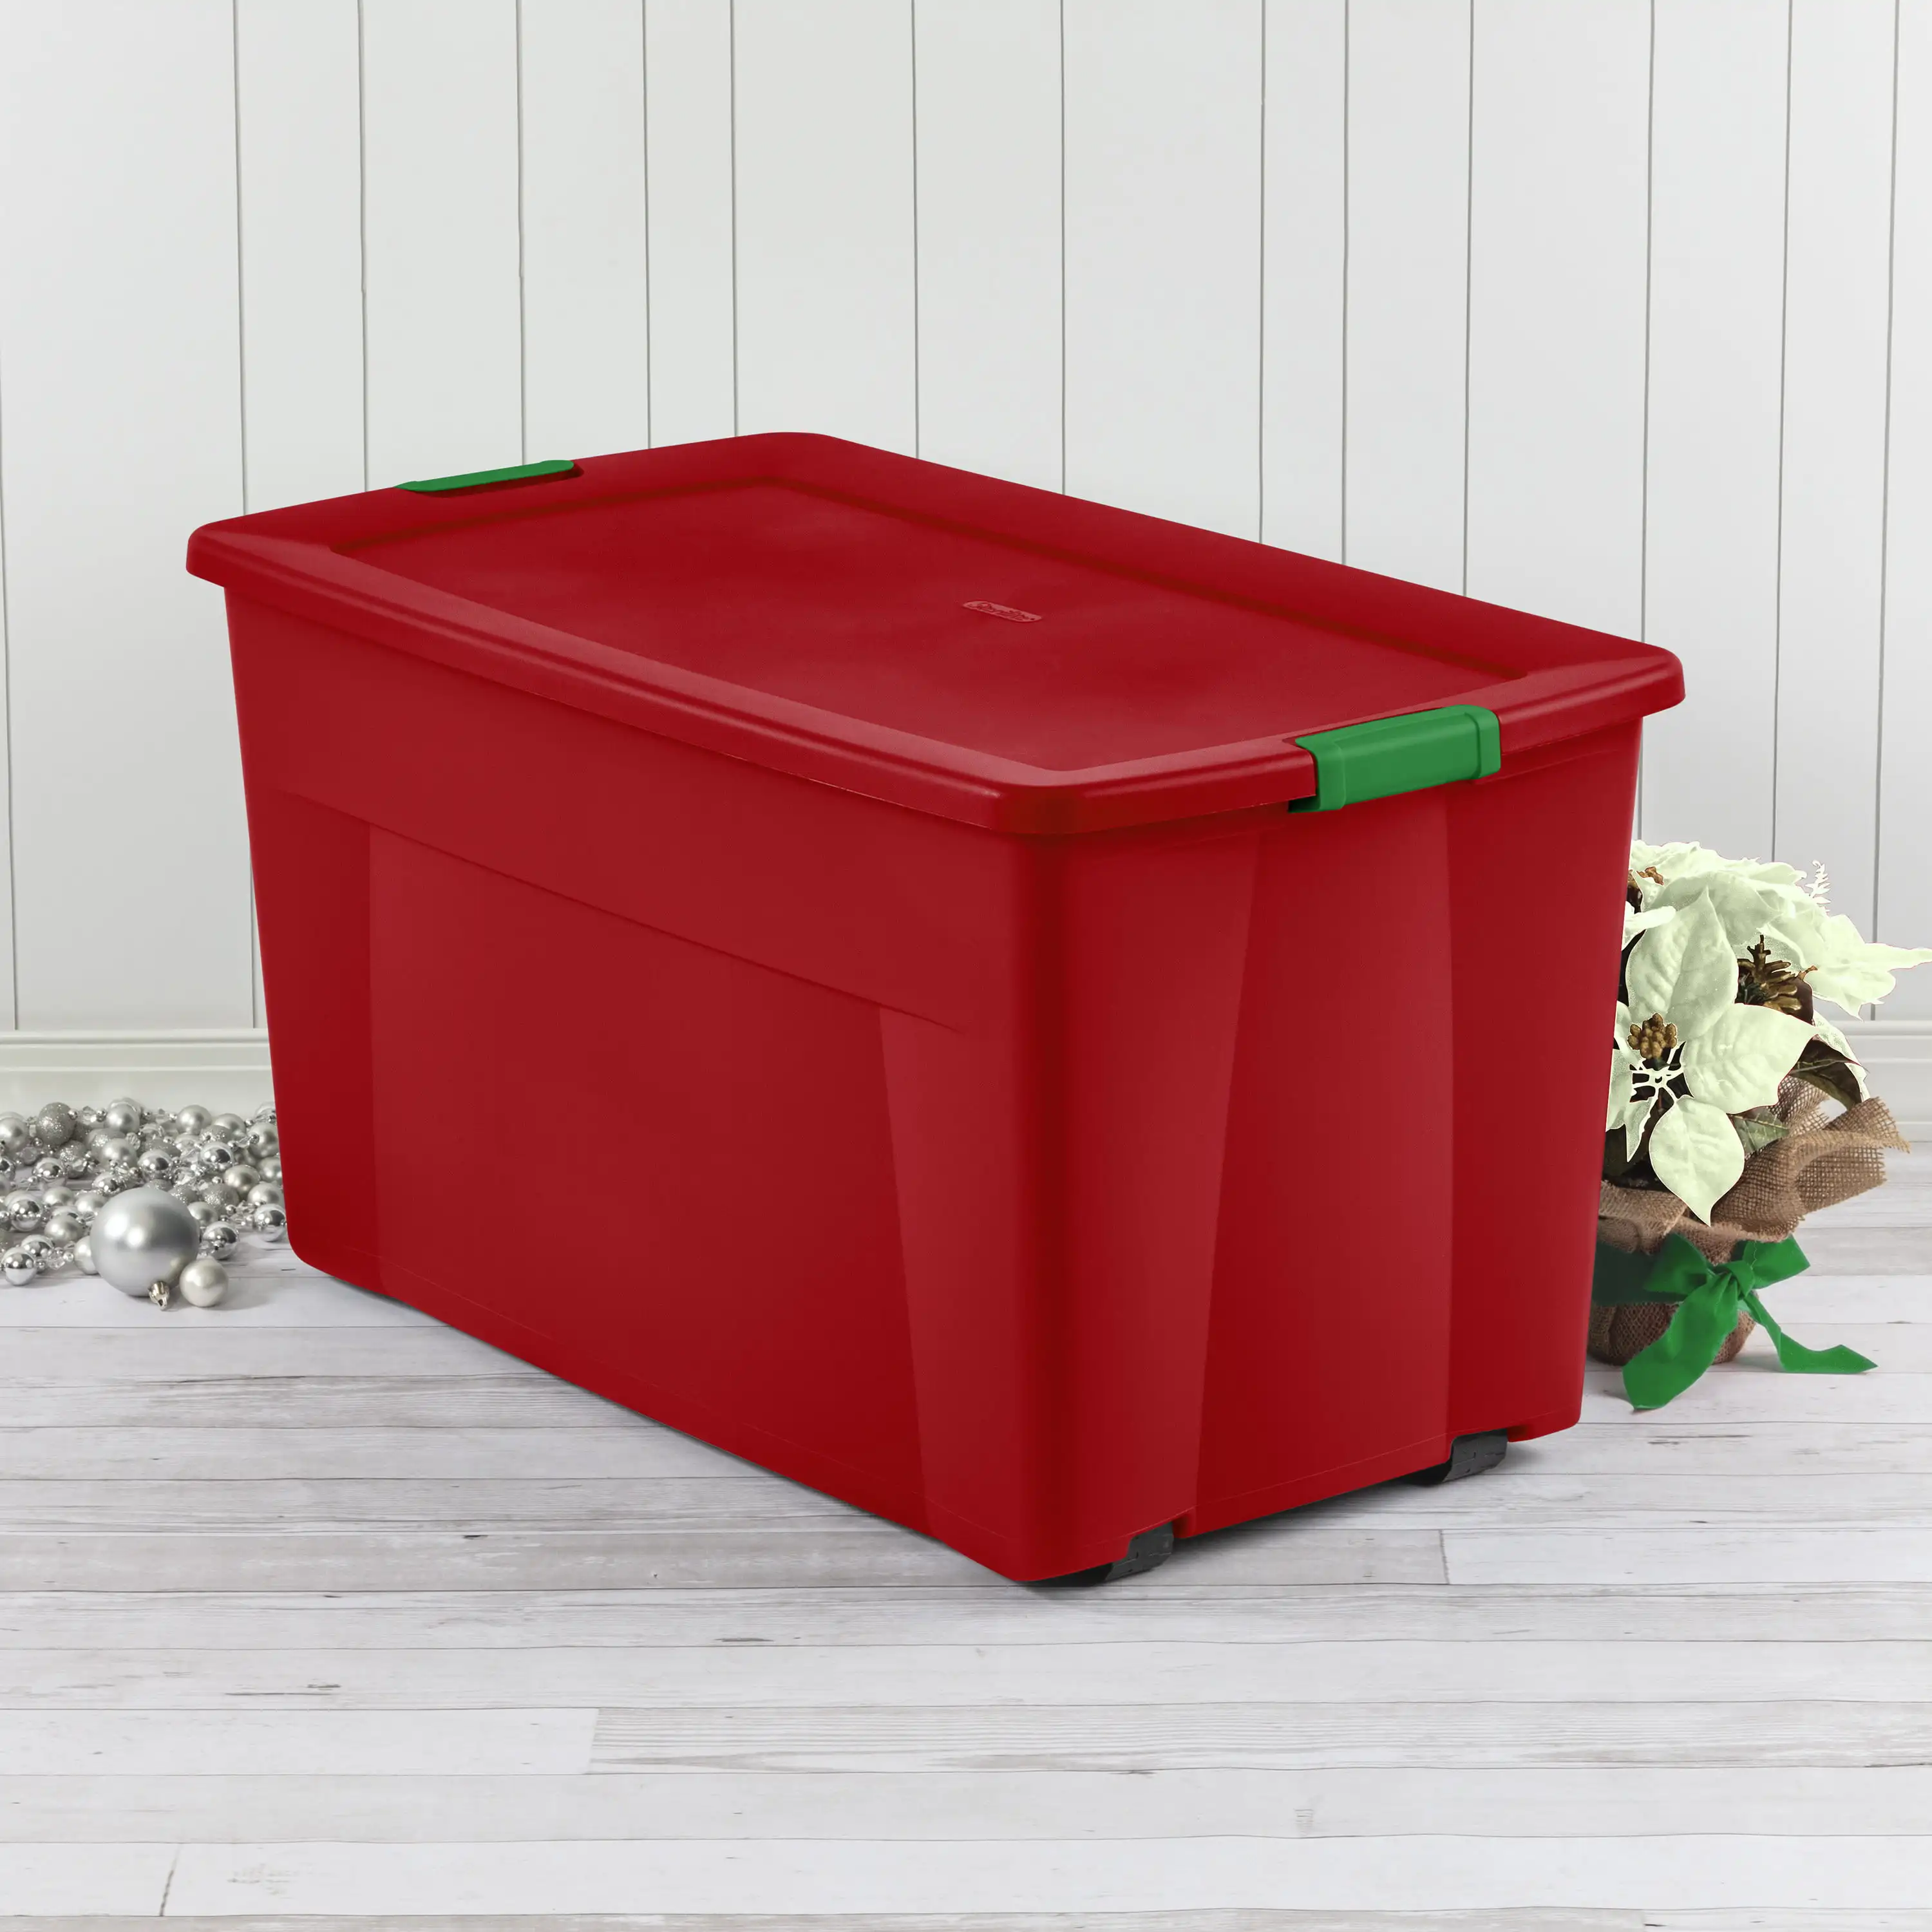 https://ae01.alicdn.com/kf/Sb280afba7f7d4870993700f4e7af0953K/Sterilite-45-Gallon-Wheeled-Latch-Tote-Plastic-Red-Christmas-Set-of-4.jpg